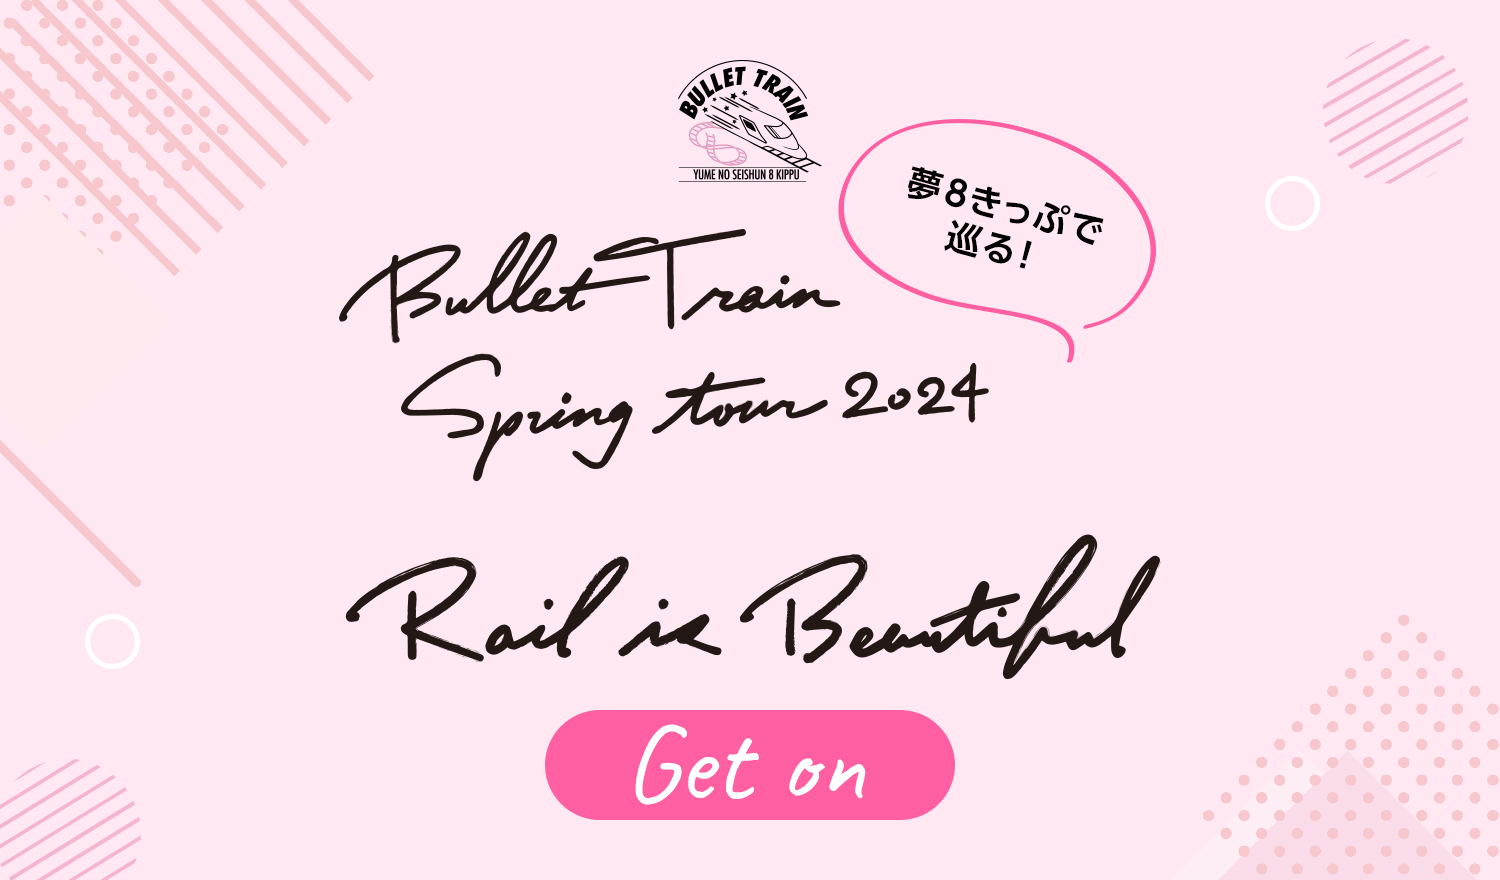 Rail is Beauthifulすごろく